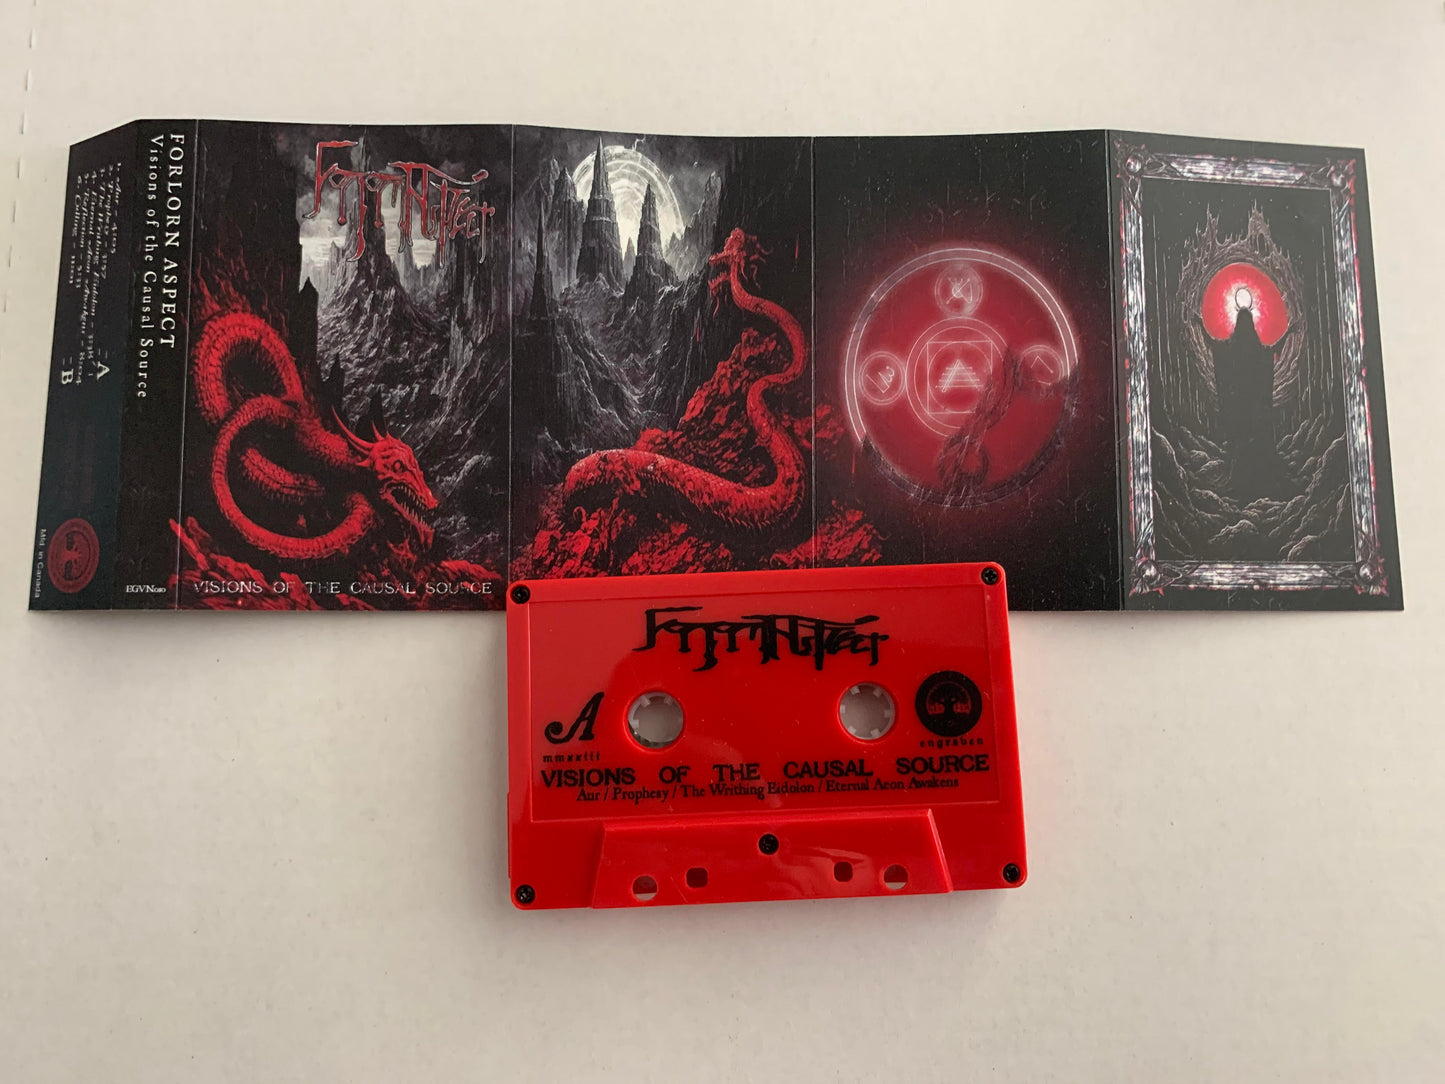 Forlorn Aspect - Visions of the Causal Source [Black Metal] (Engraven - Tape - 9/7/23)